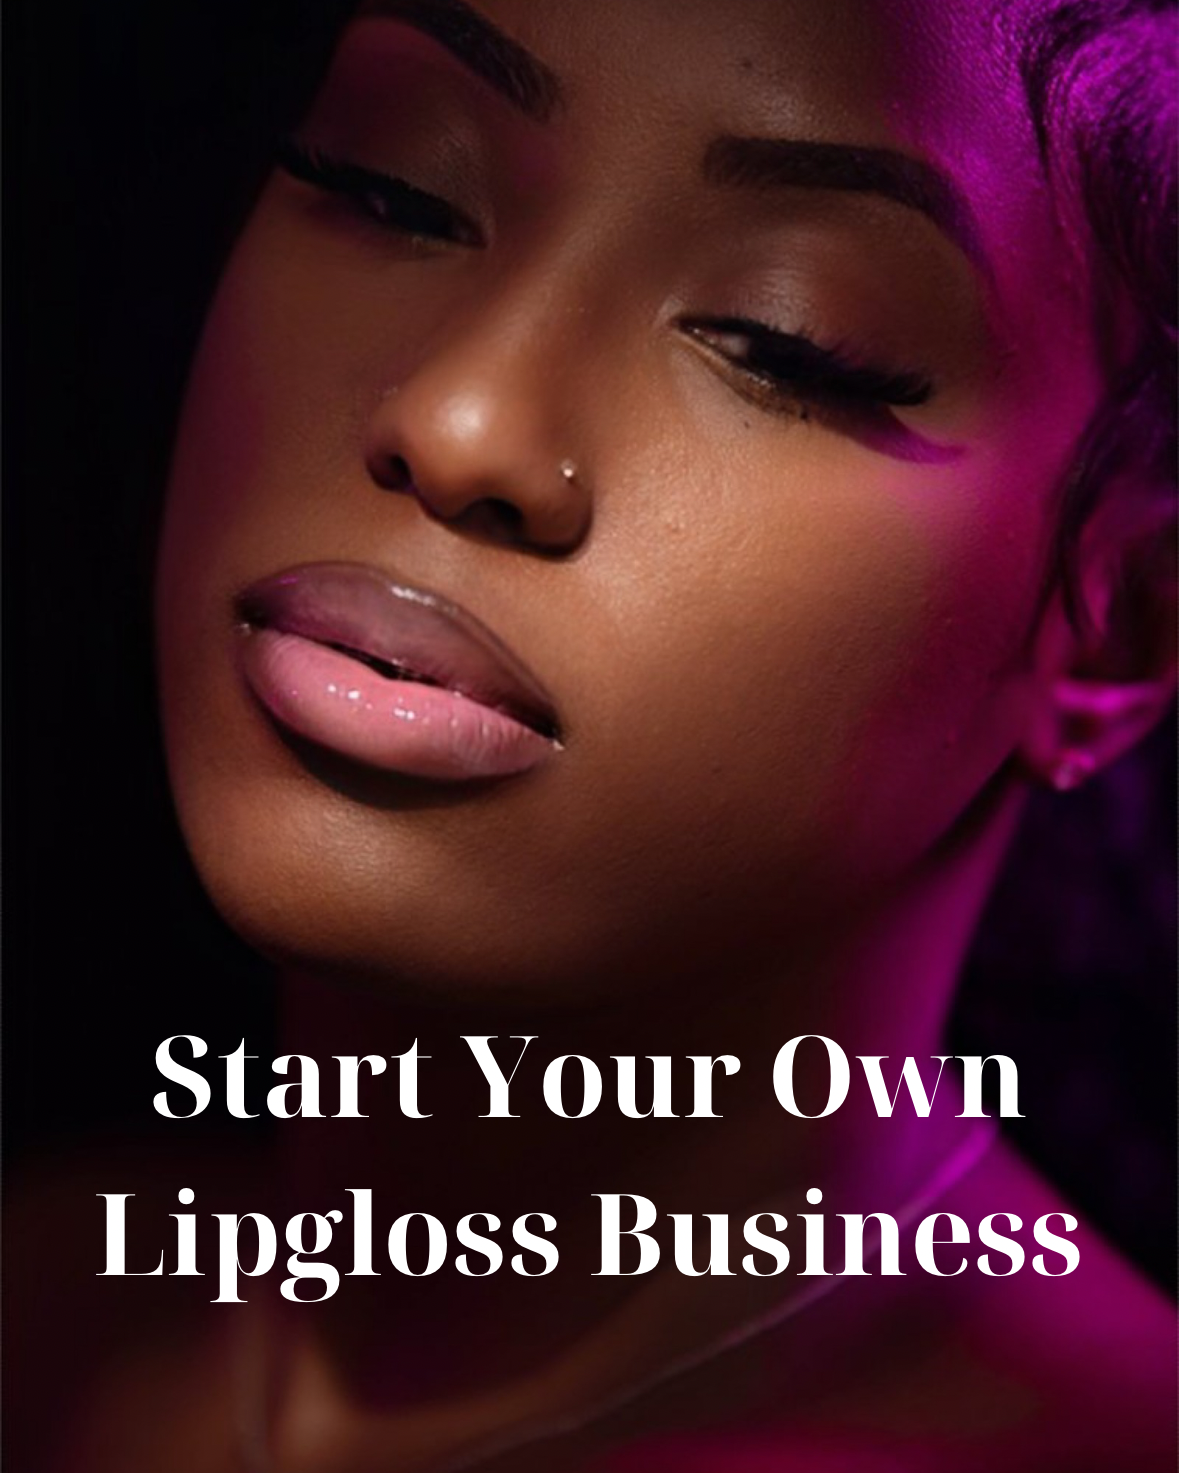 Start Your Own Lipgloss Business